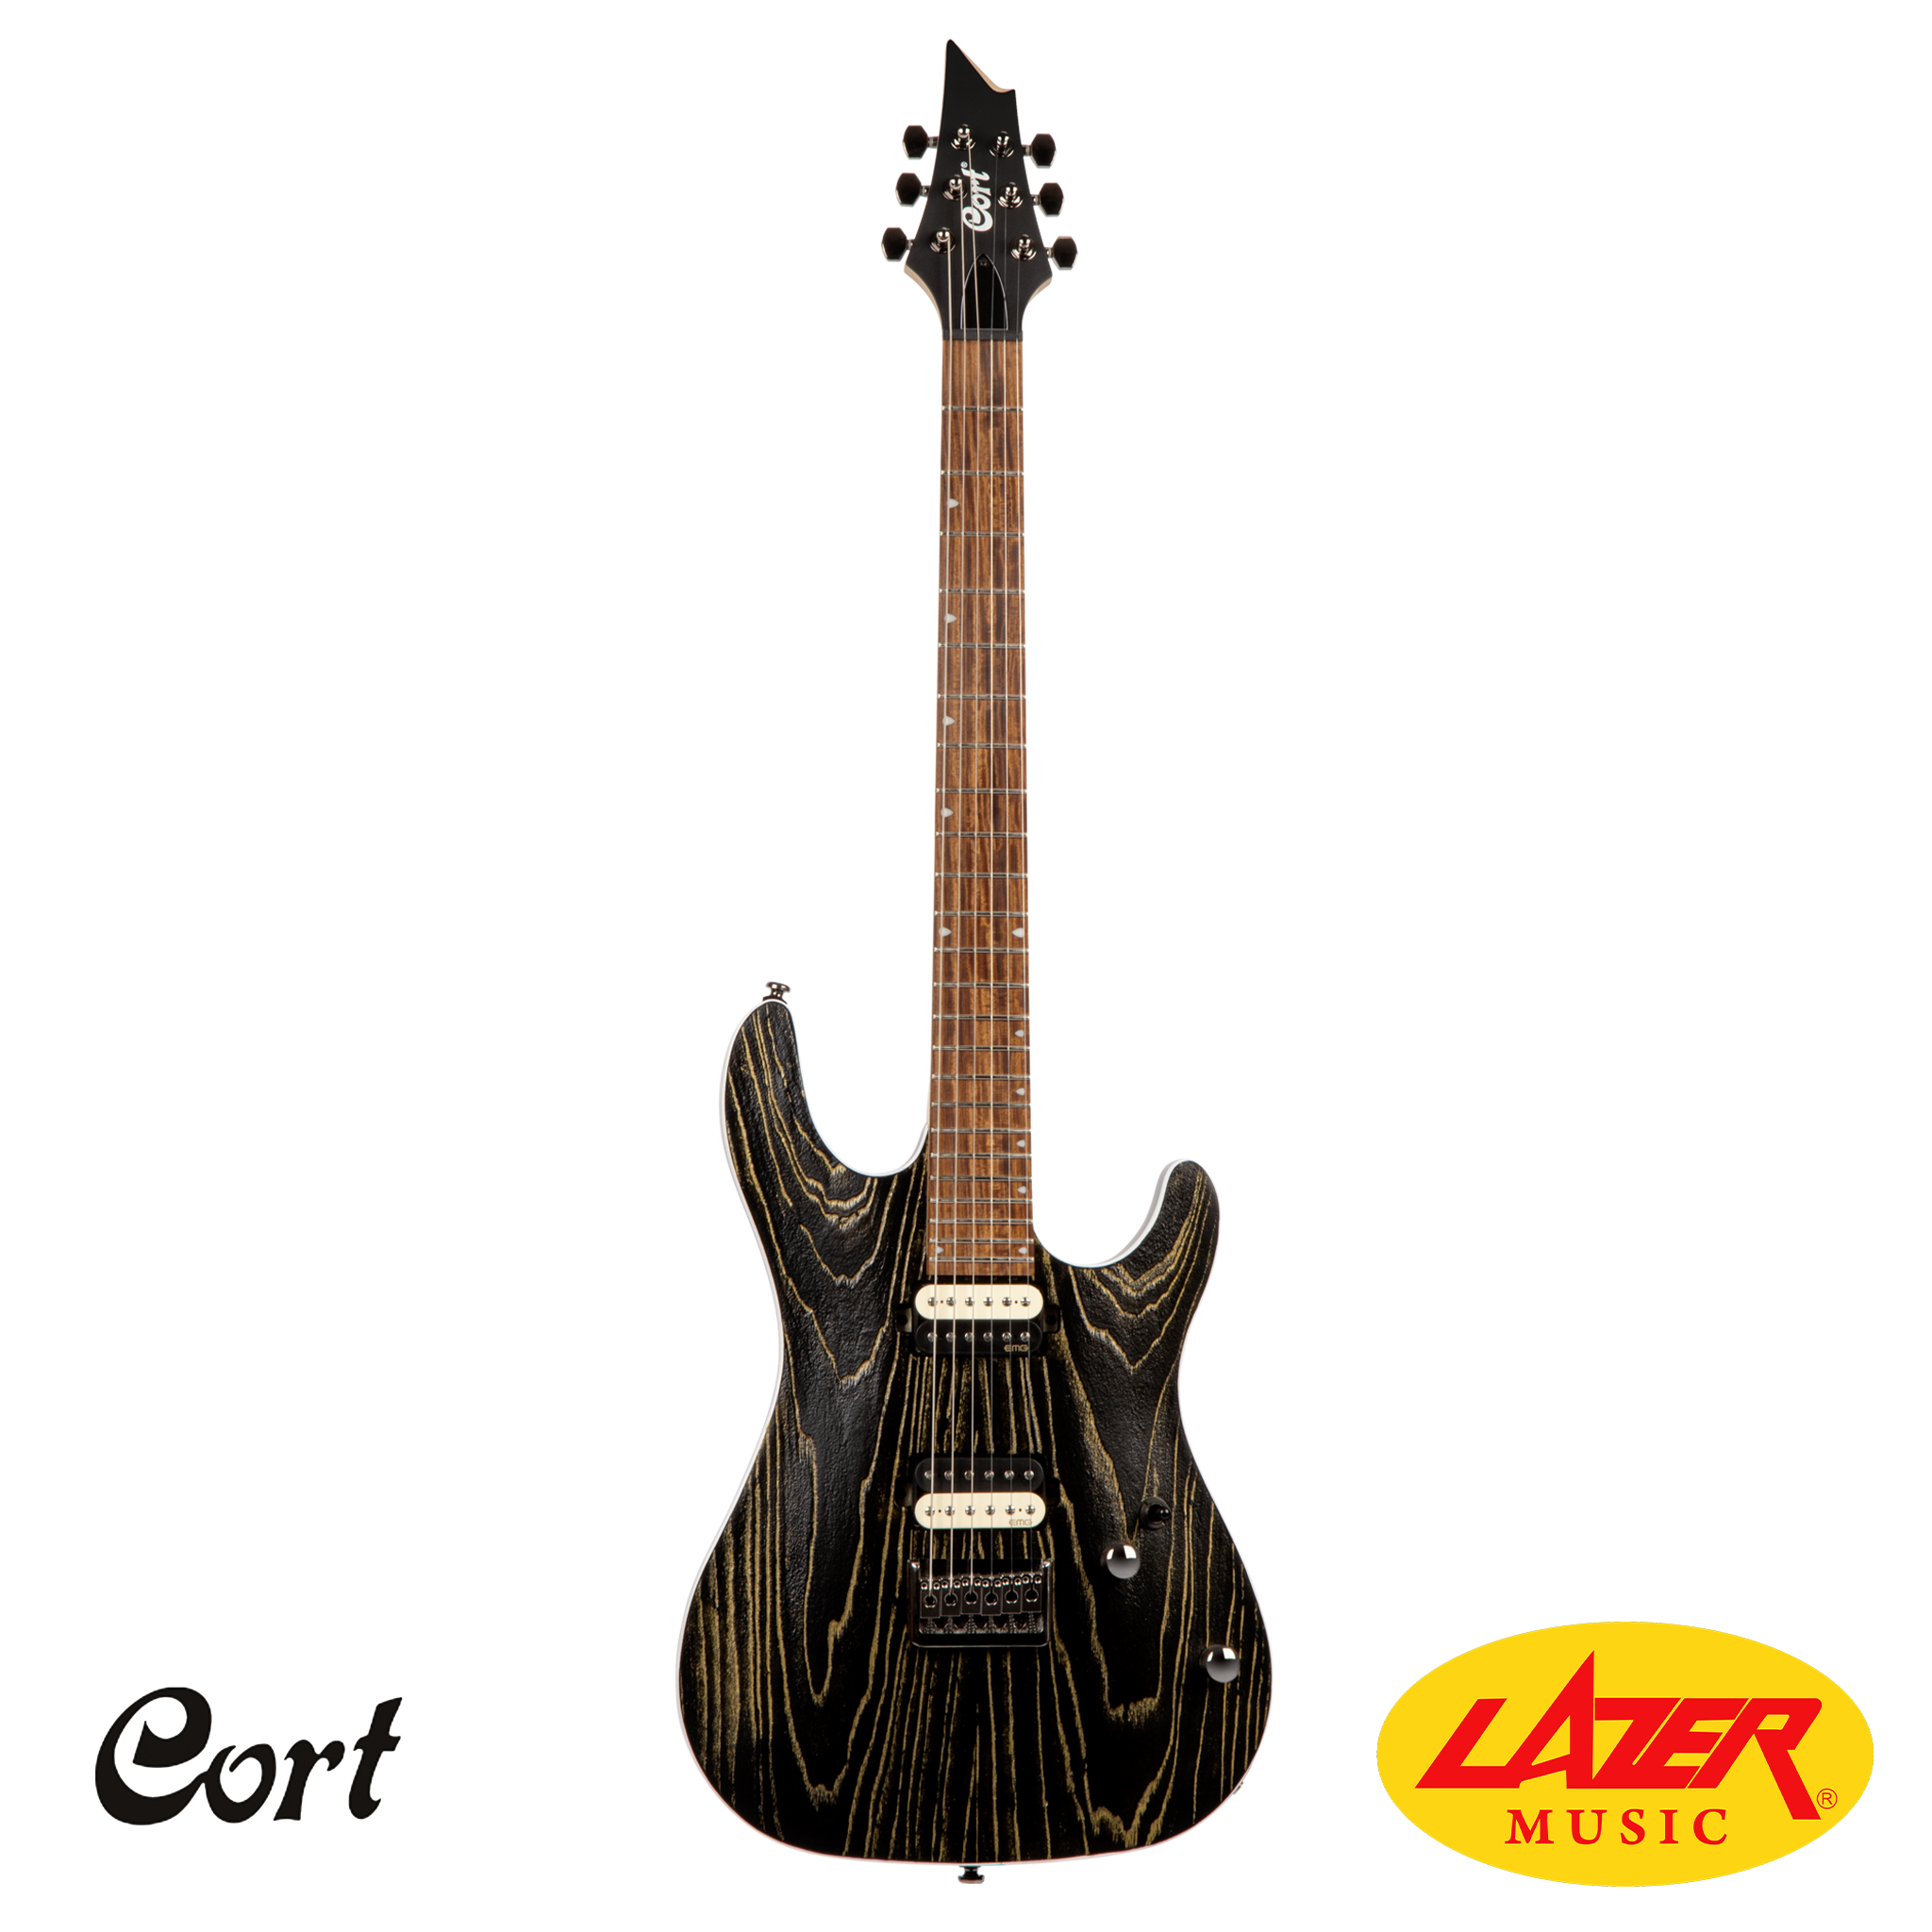 Cort KX300 Etched-EBR Electric Gutar With Bag